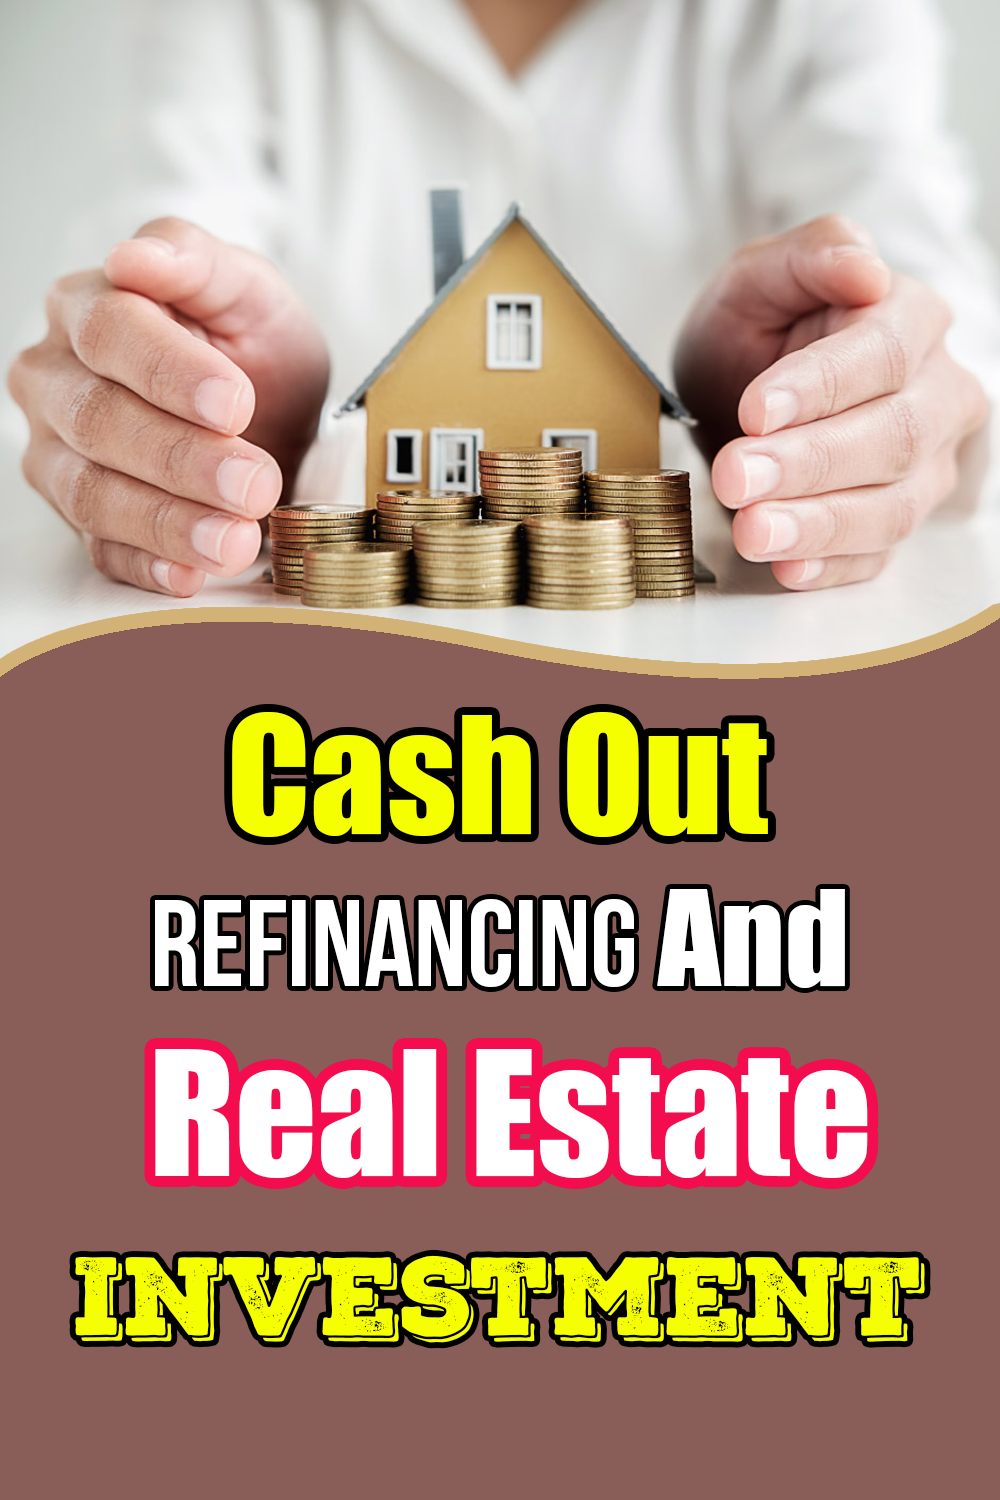 Cash Out Refinancing and Real Estate Investment